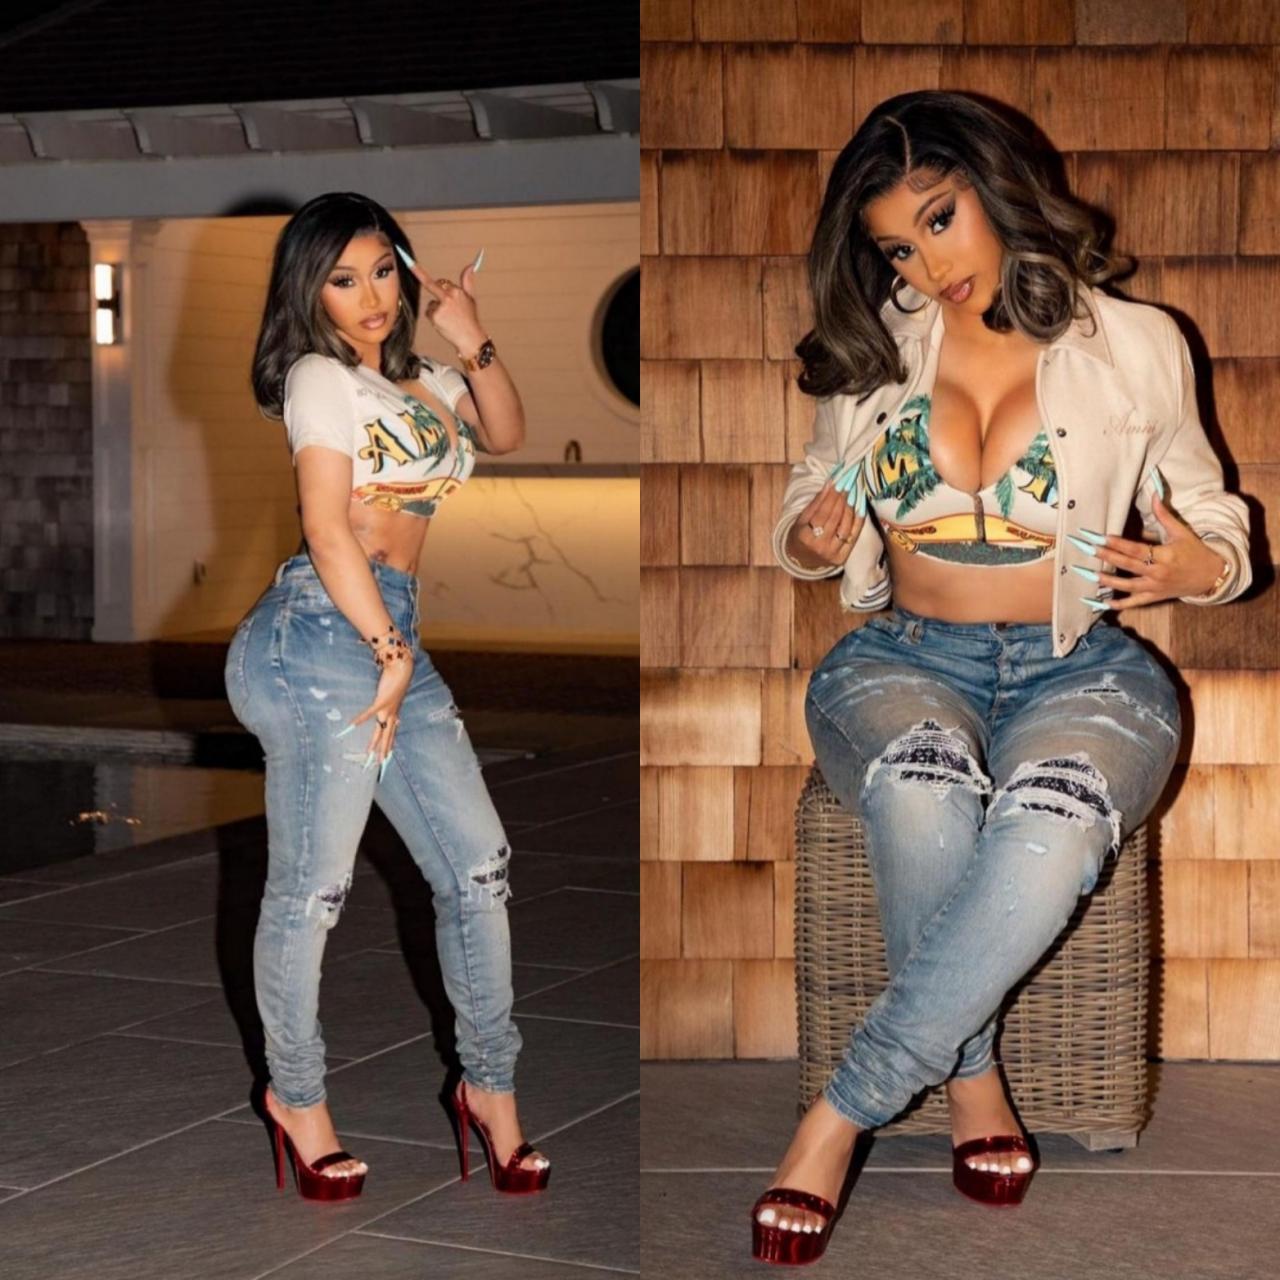 Cardi B returns to Instagram with beautiful photos after deactivating account over Grammys fight with fans